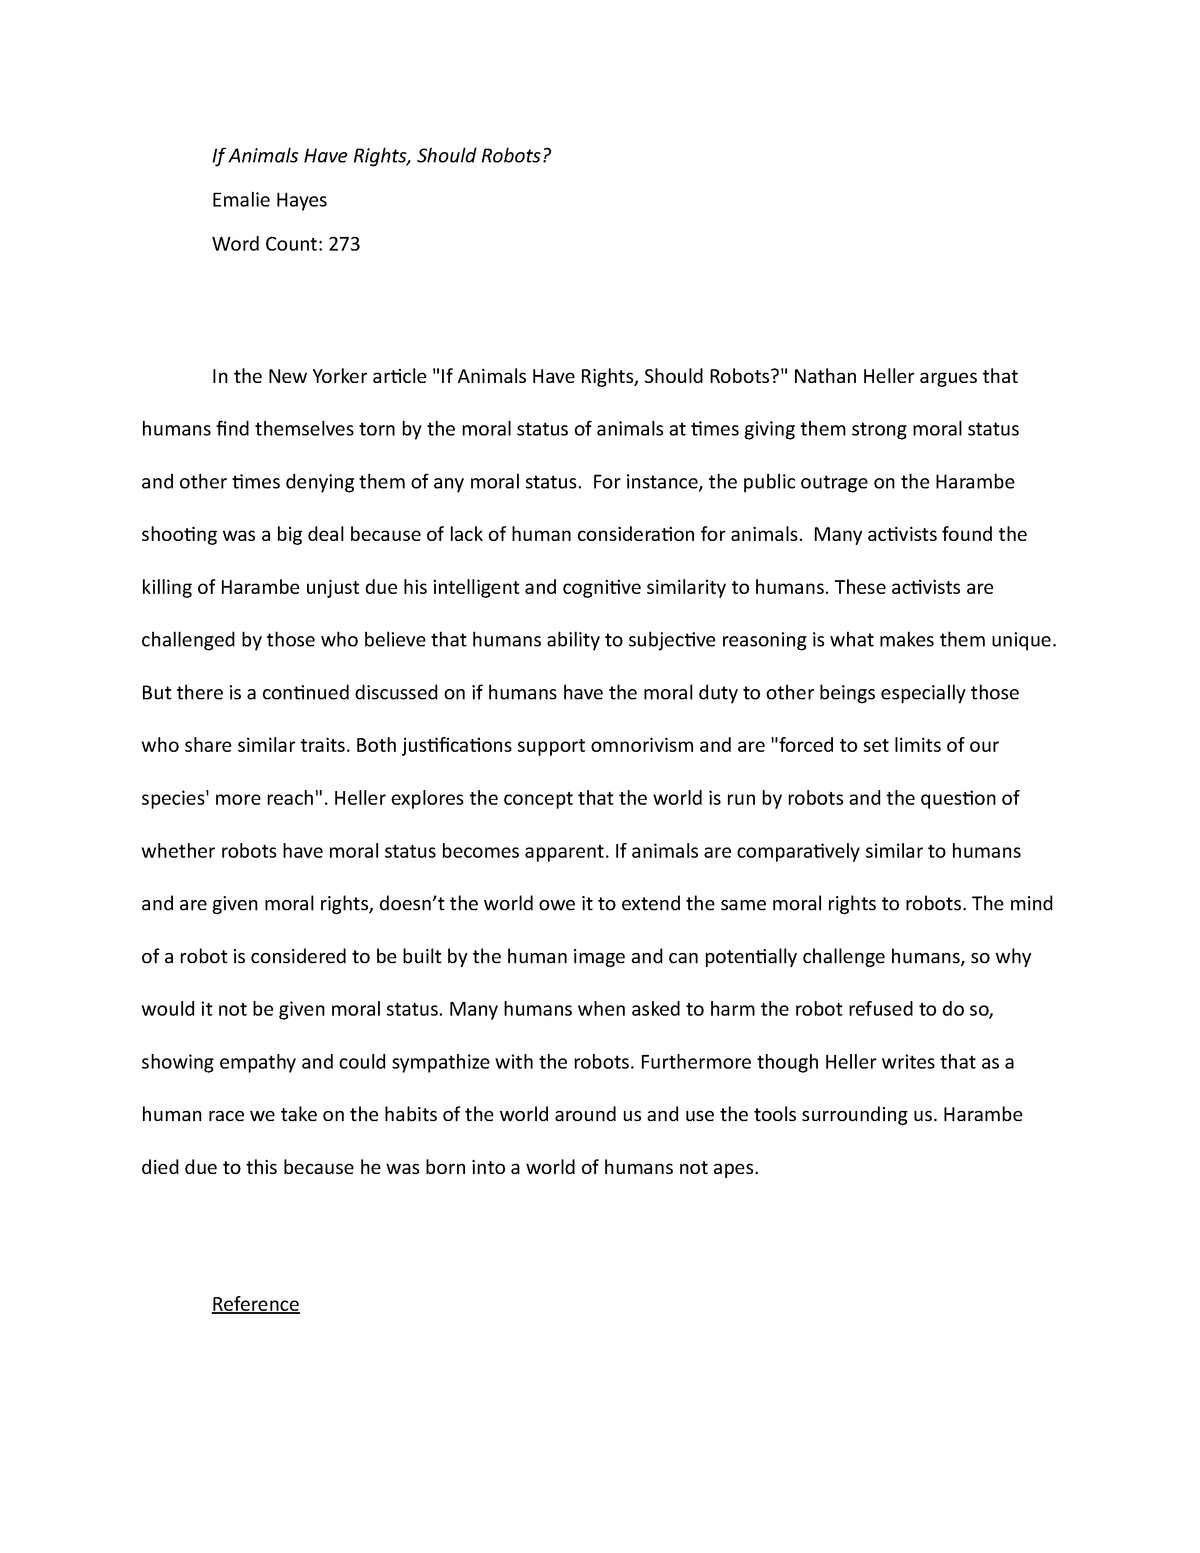 personal essay the new yorker